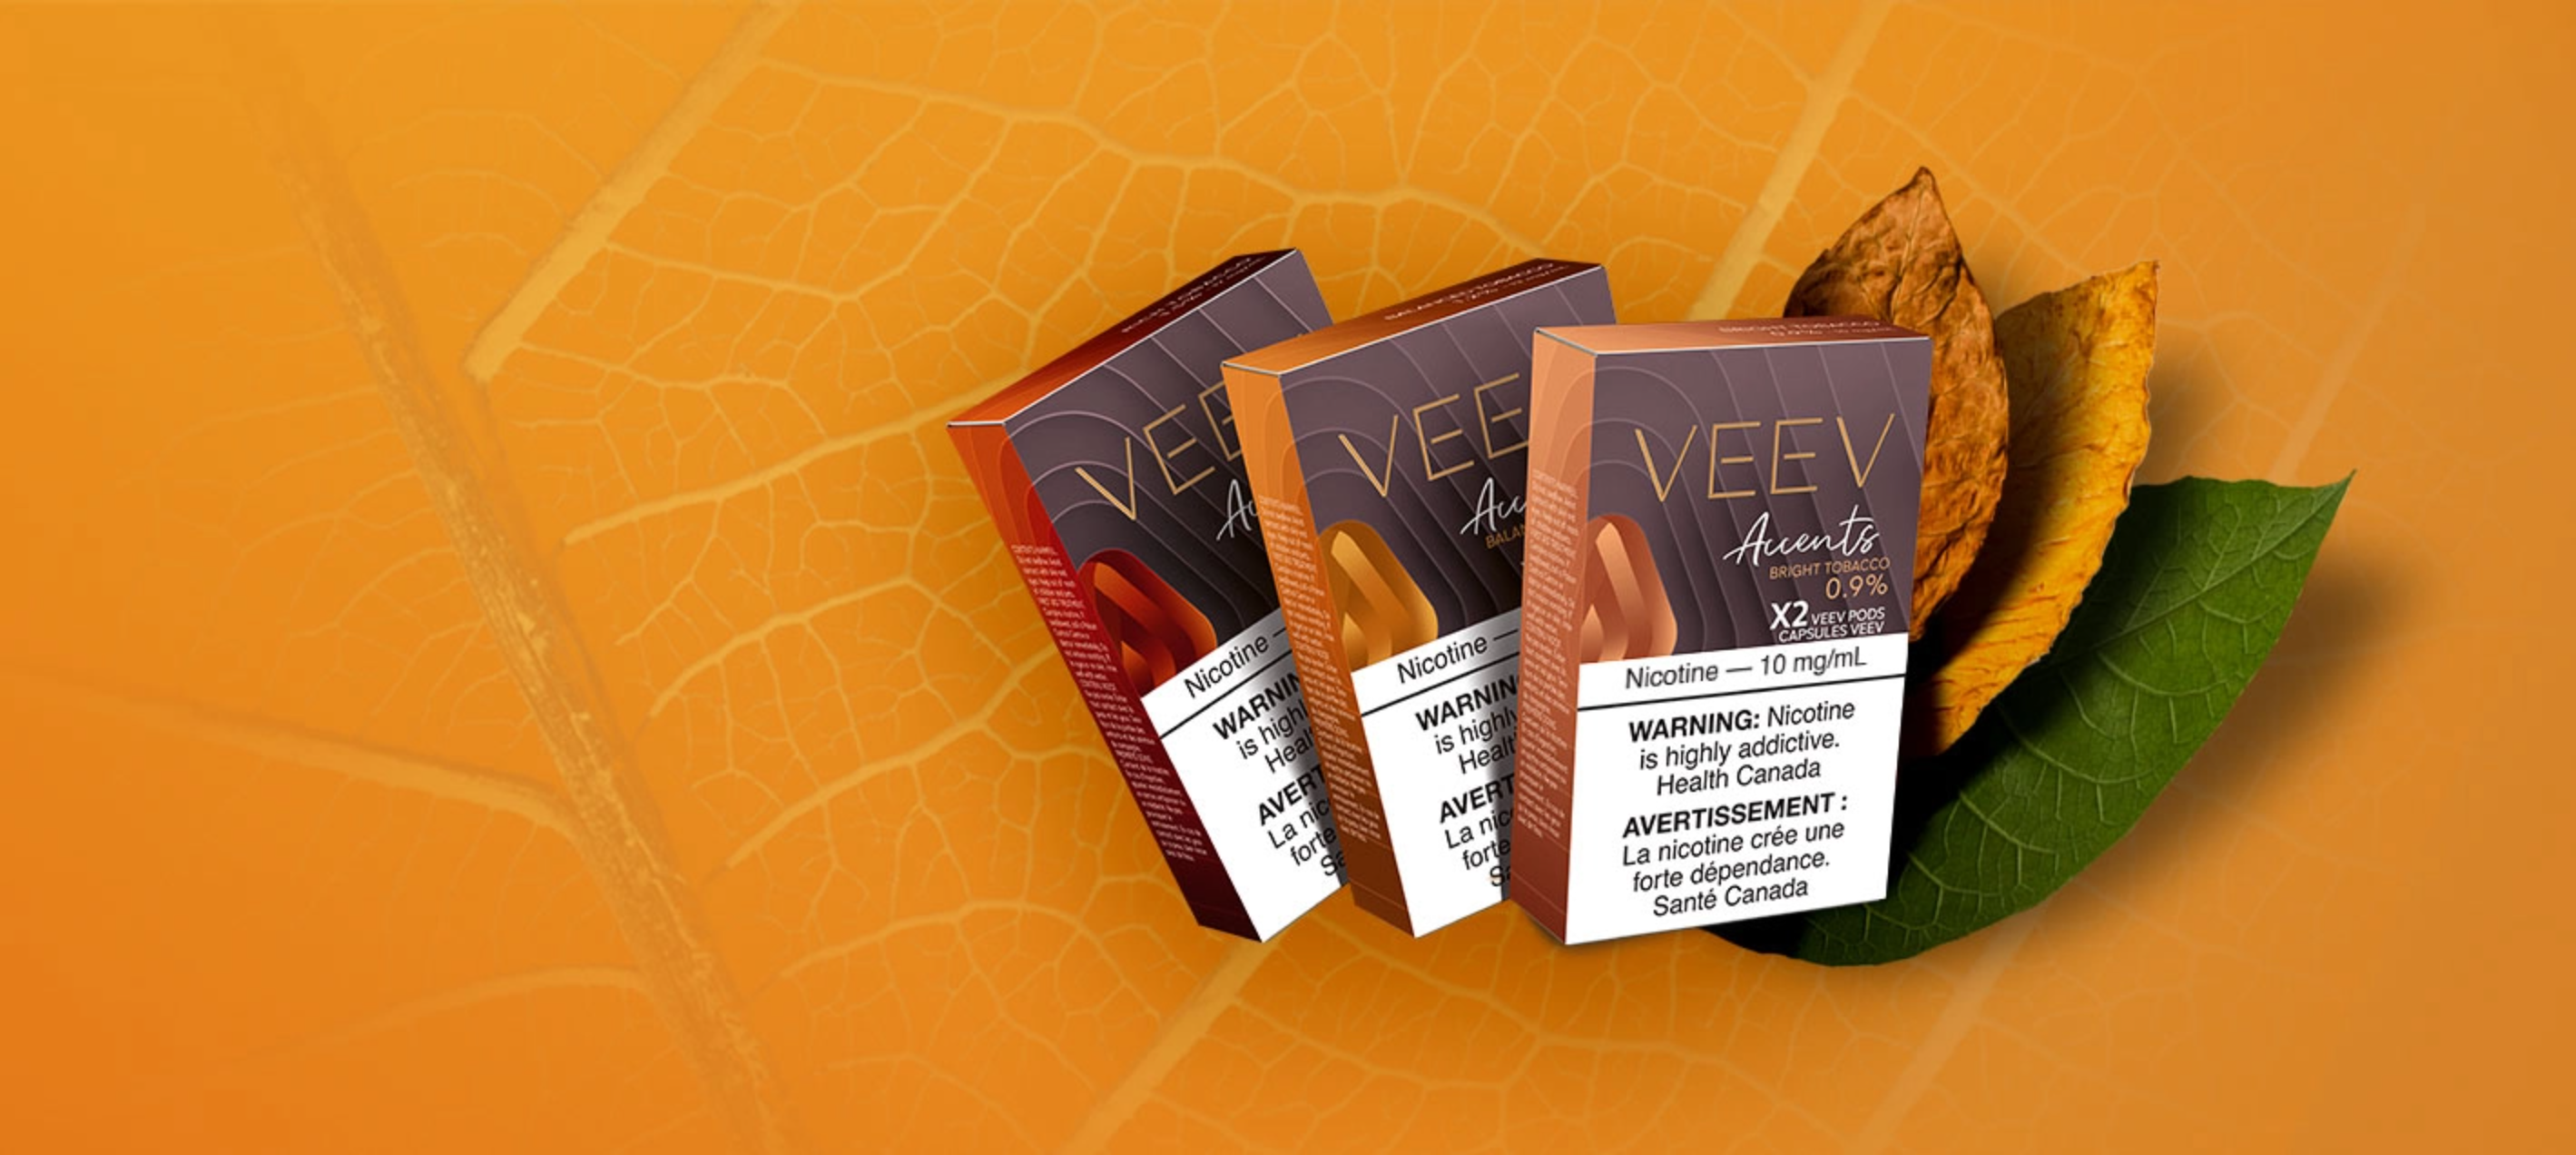 Just in! Introducing VEEV Accents—exclusive VEEV flavours made from real tobacco